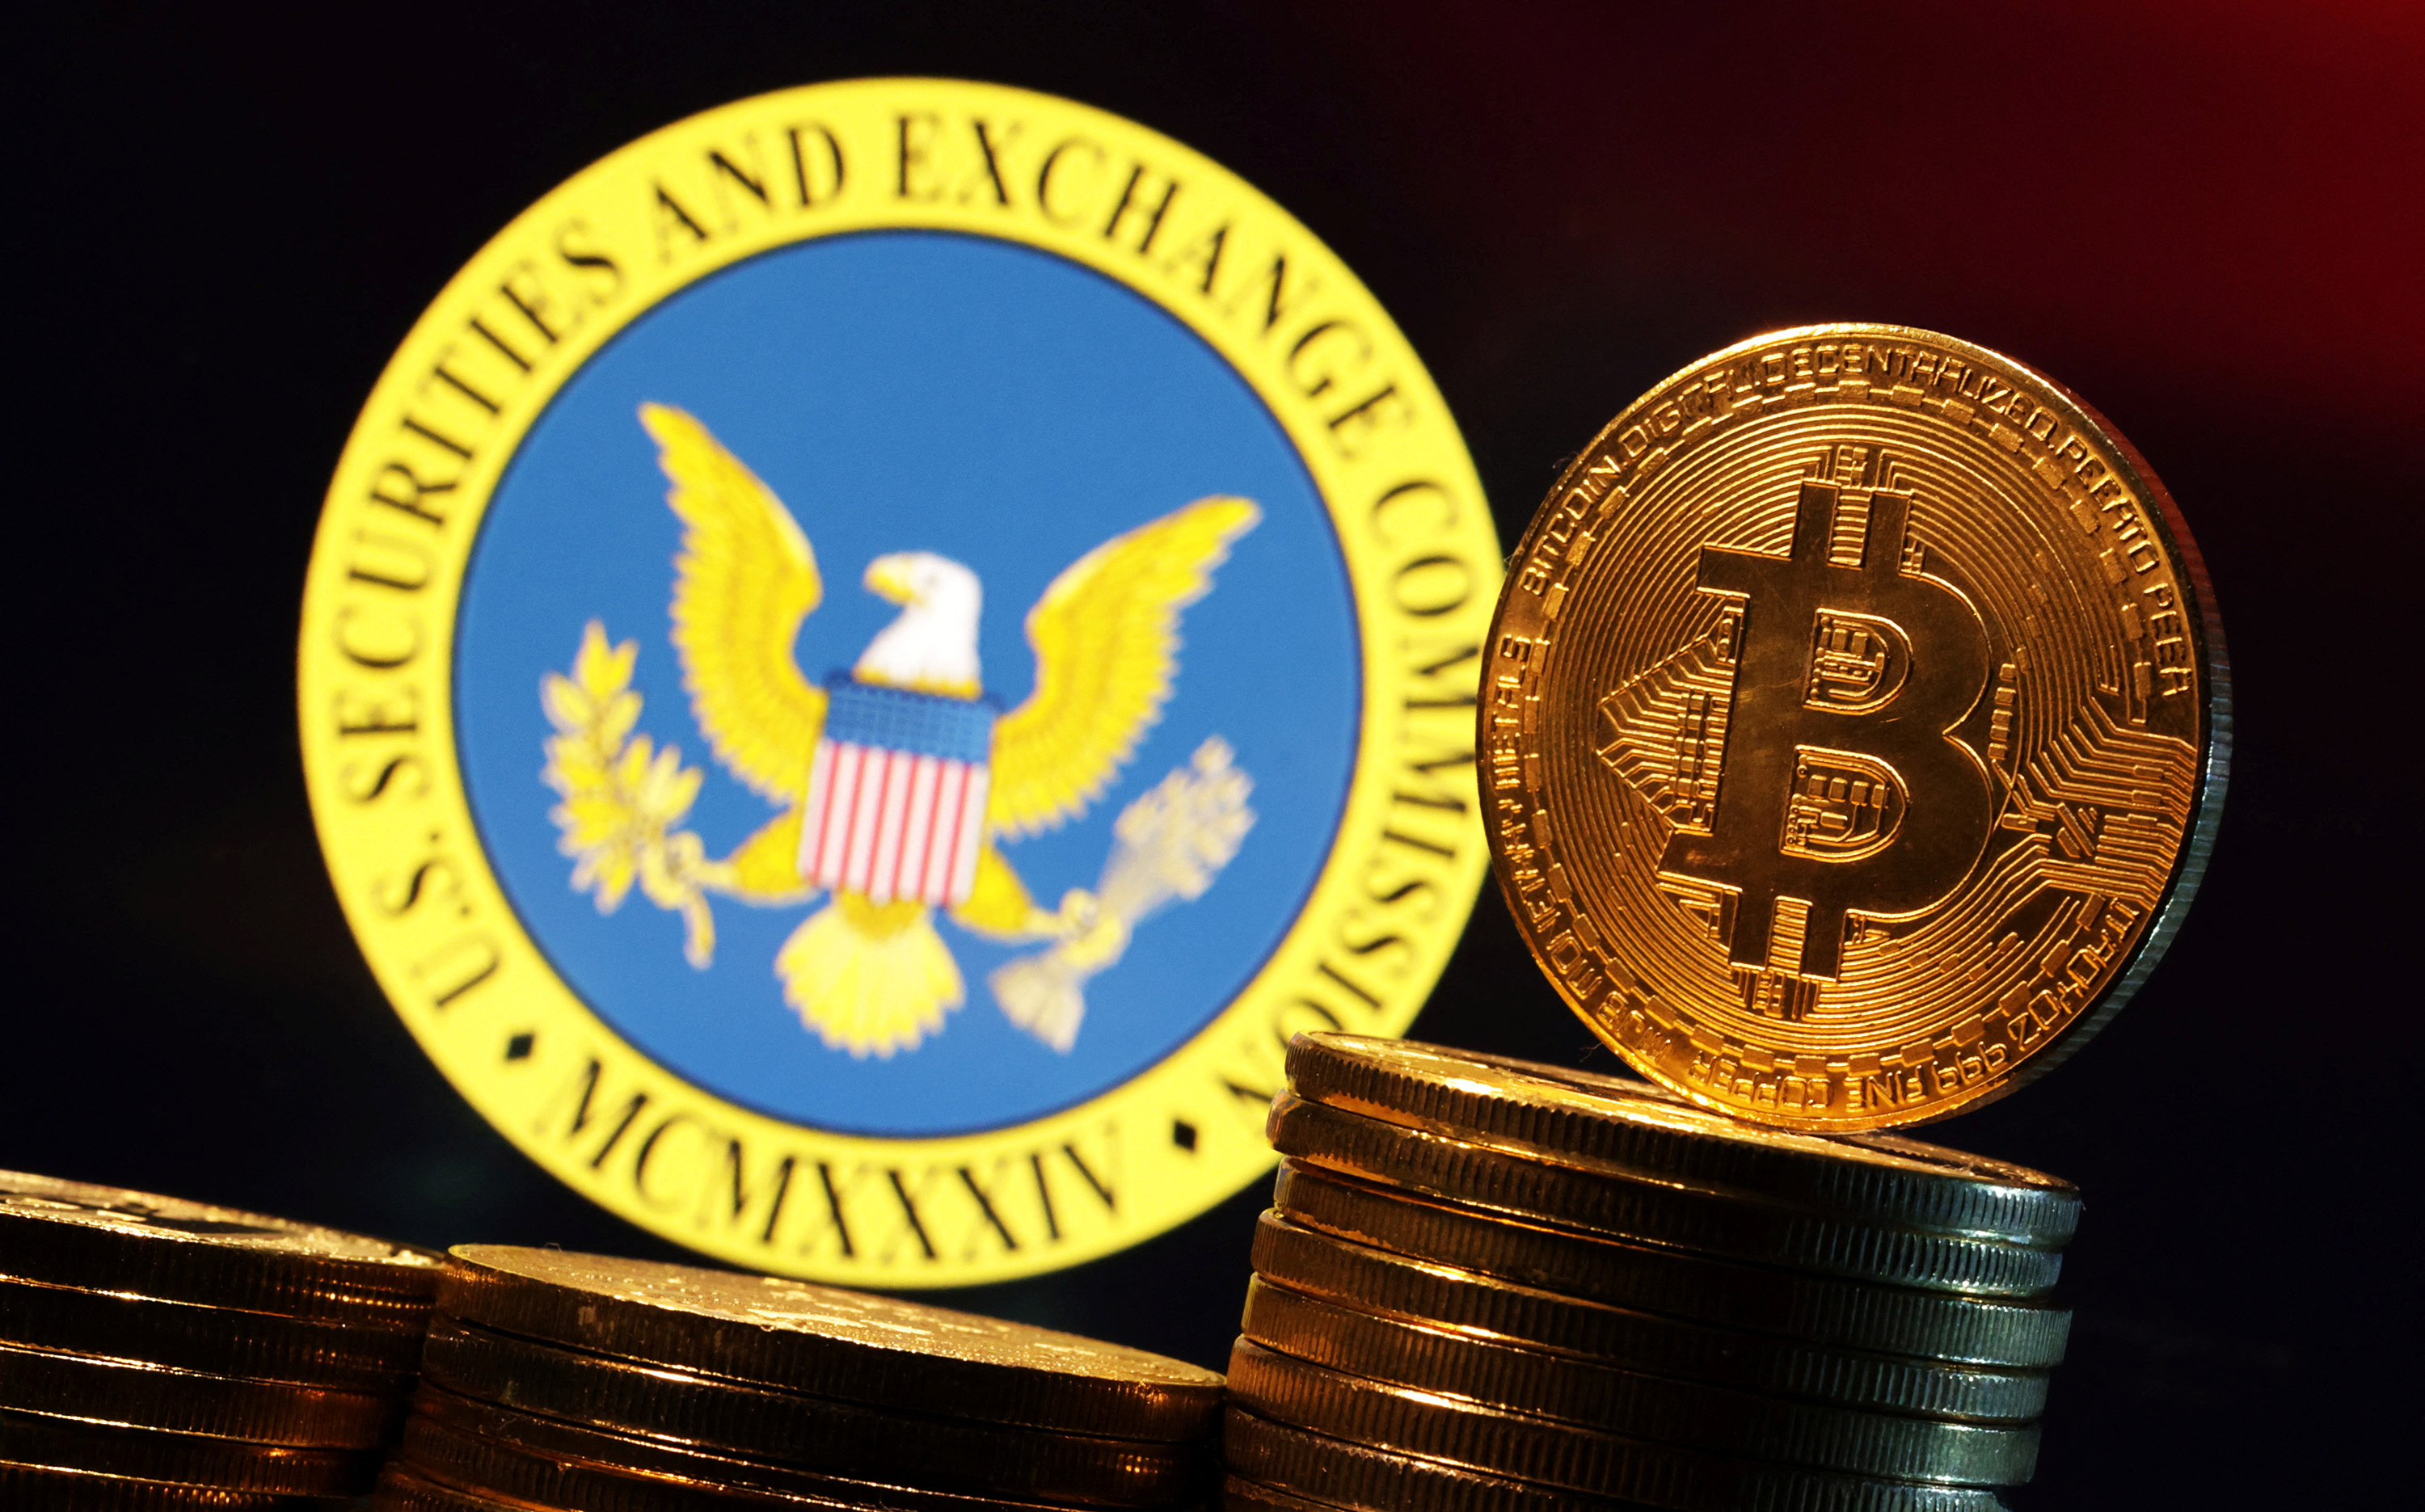 Illustration shows U.S. Securities and Exchange Commission logo and representation of Bitcoin cryptocurrency